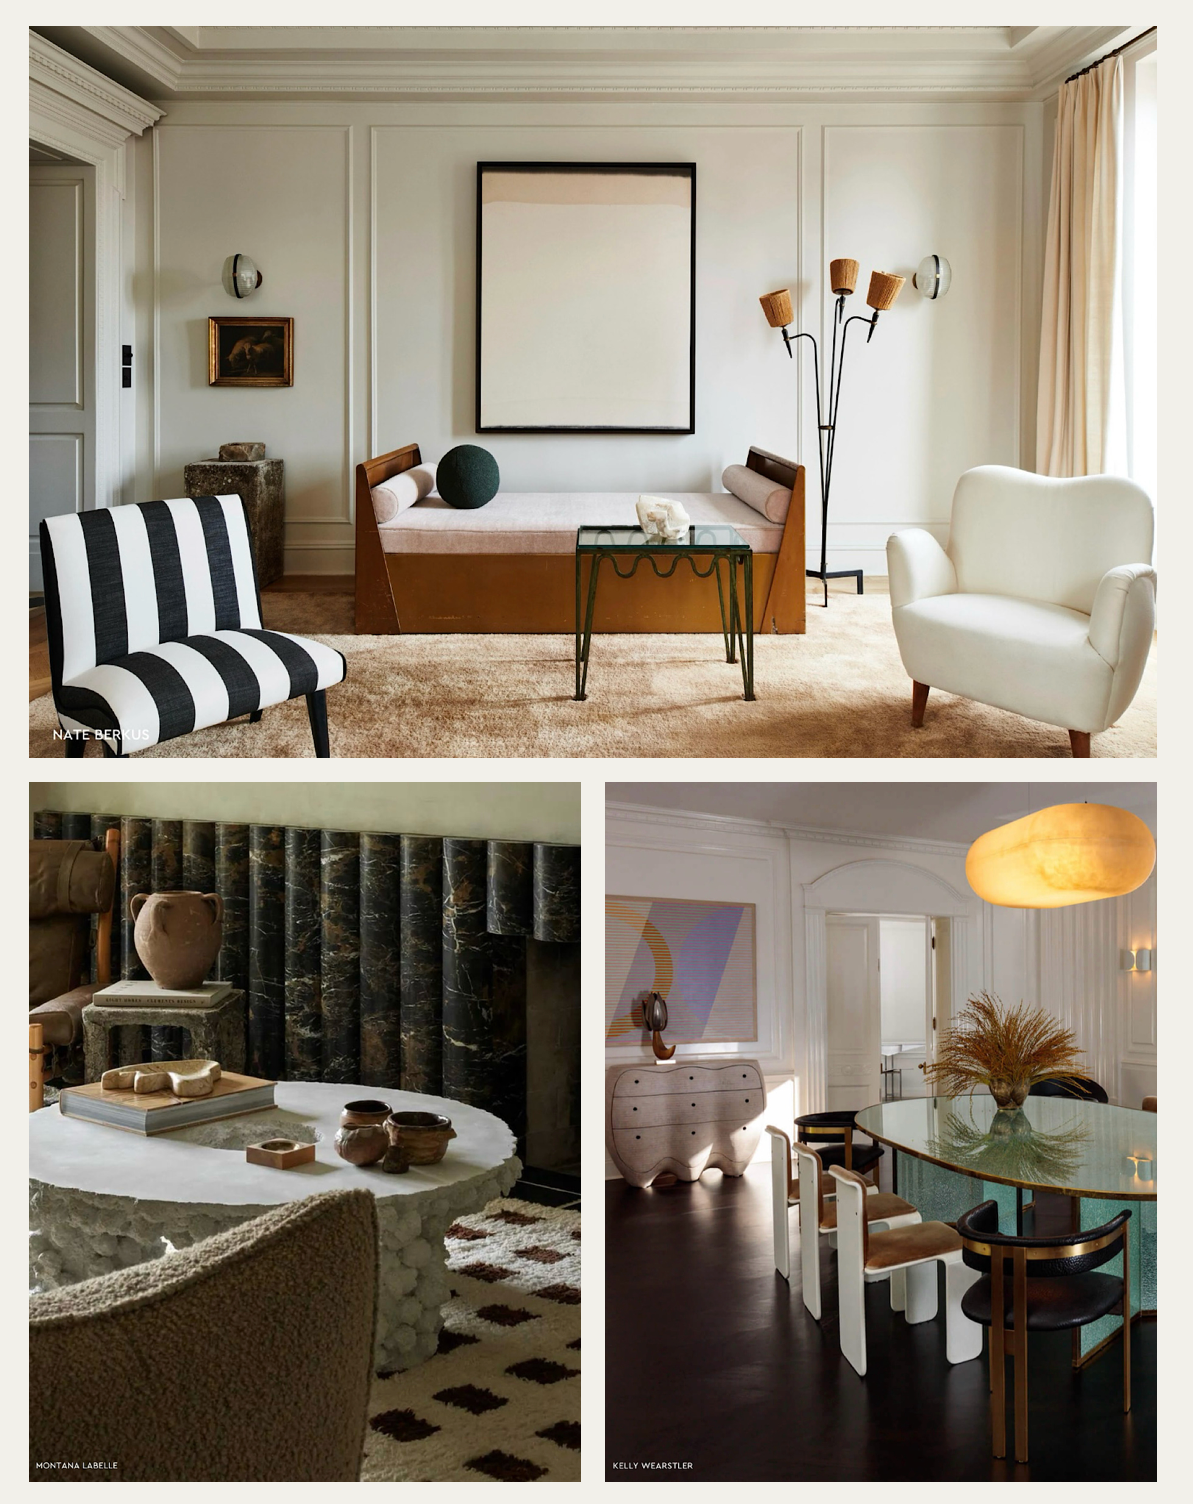 A collage of images featuring curved furniture forms in three well-designed spaces.